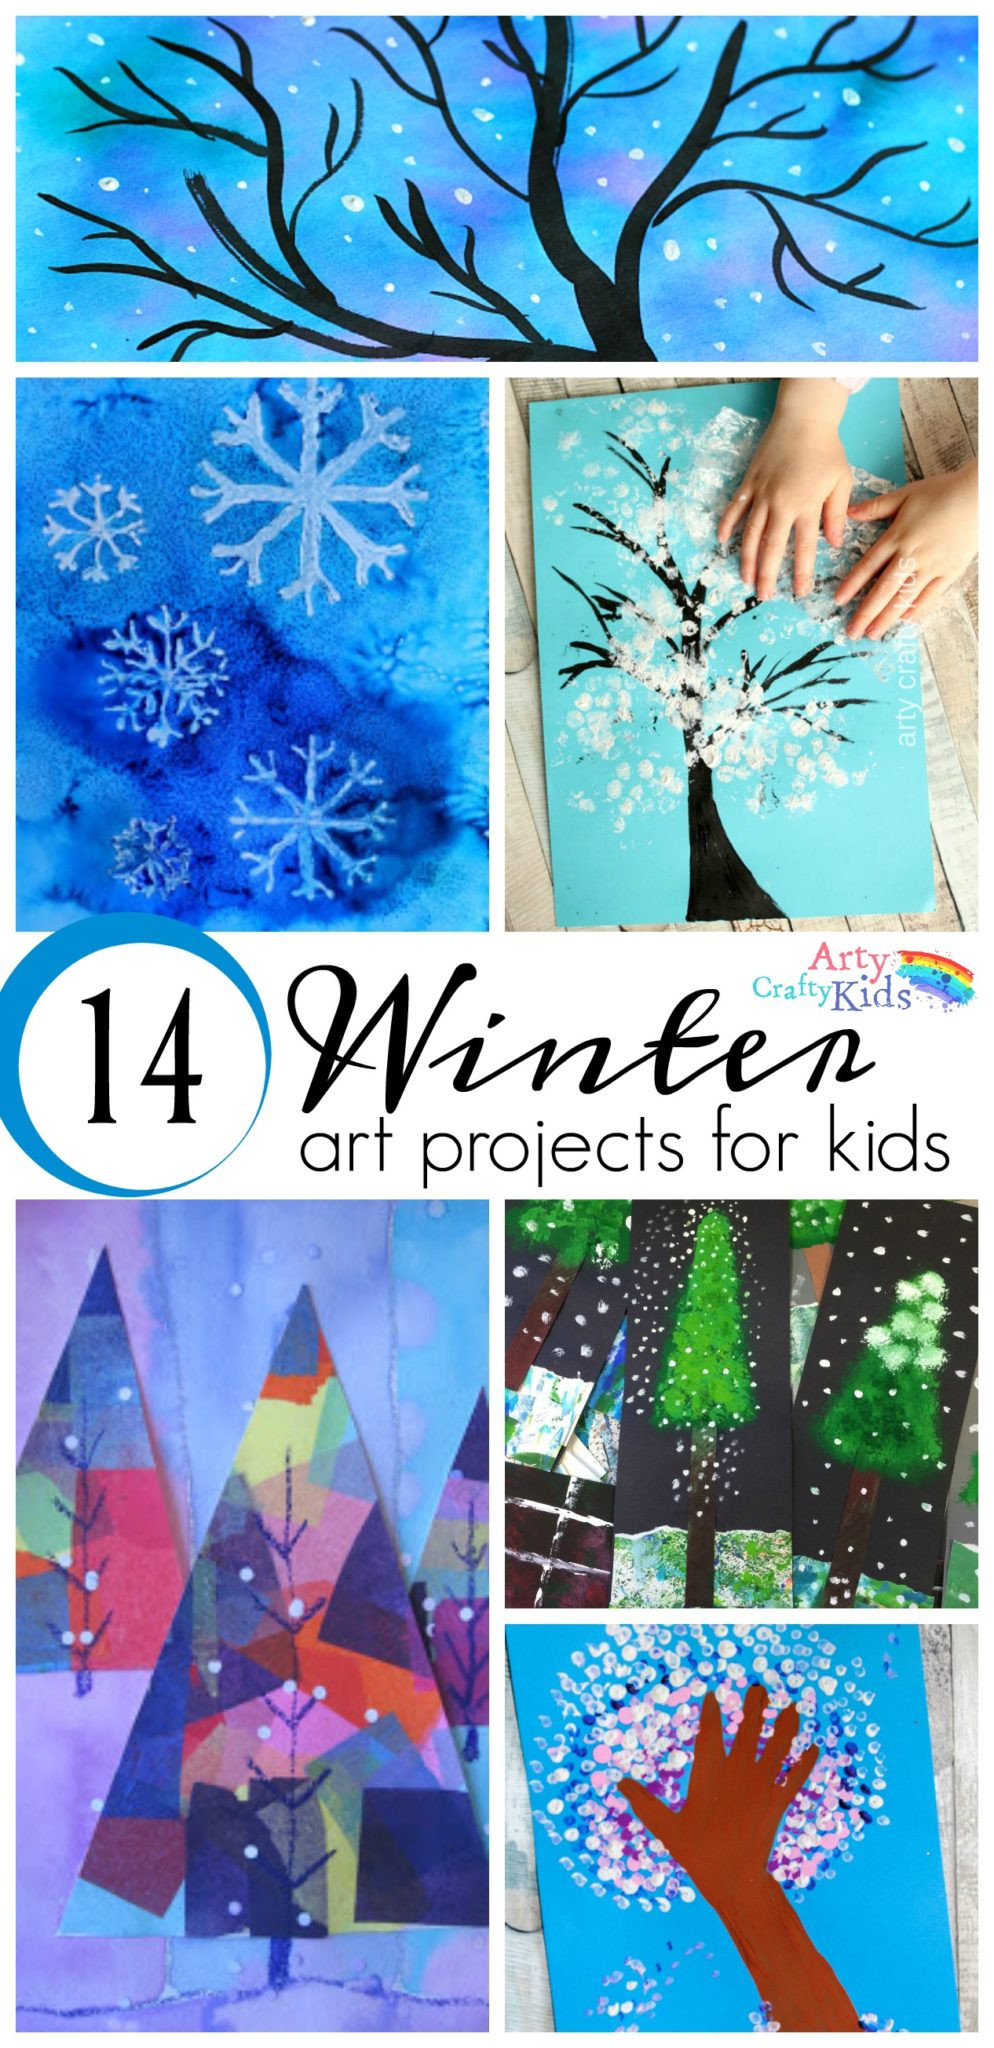 Art Project Ideas For Toddlers
 14 Wonderful Winter Art Projects for Kids Arty Crafty Kids